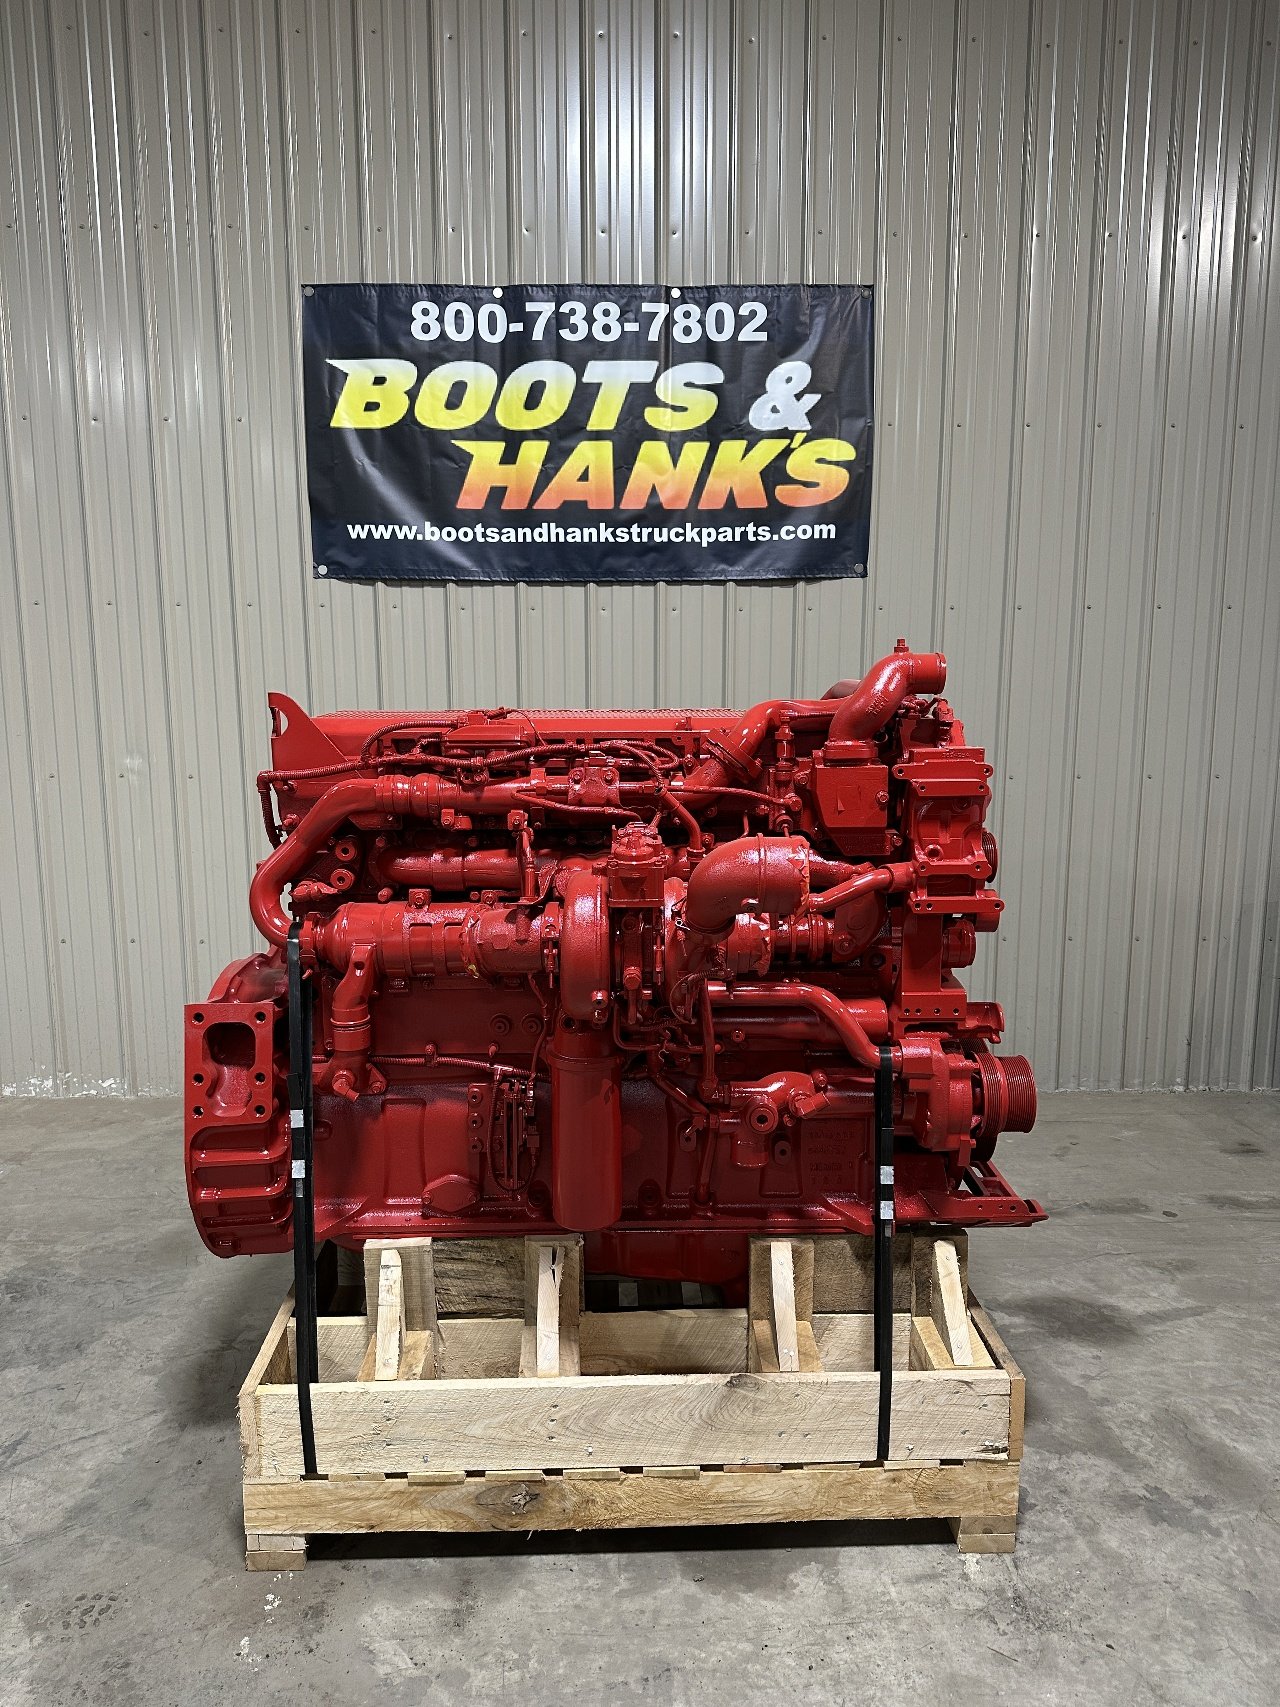 USED 2018 CUMMINS X15 COMPLETE ENGINE TRUCK PARTS #1999